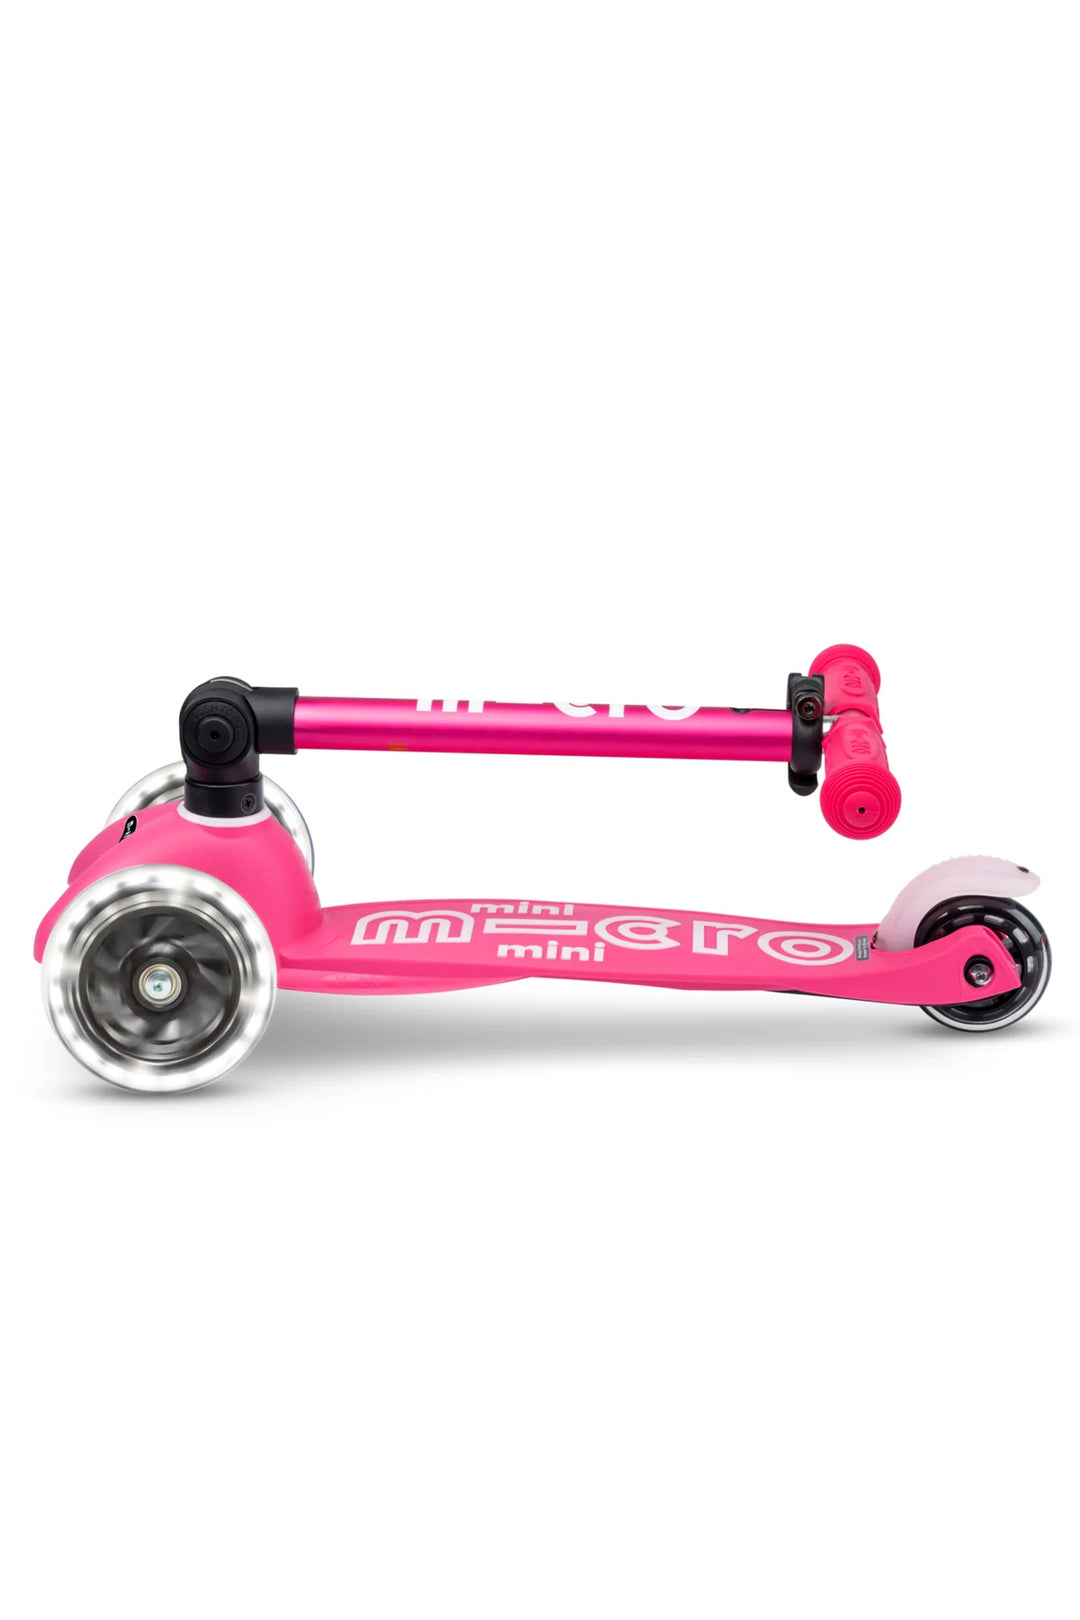 Micro Mini Deluxe Foldable LED Scooter - Pink - LOCAL PICK UP ONLY